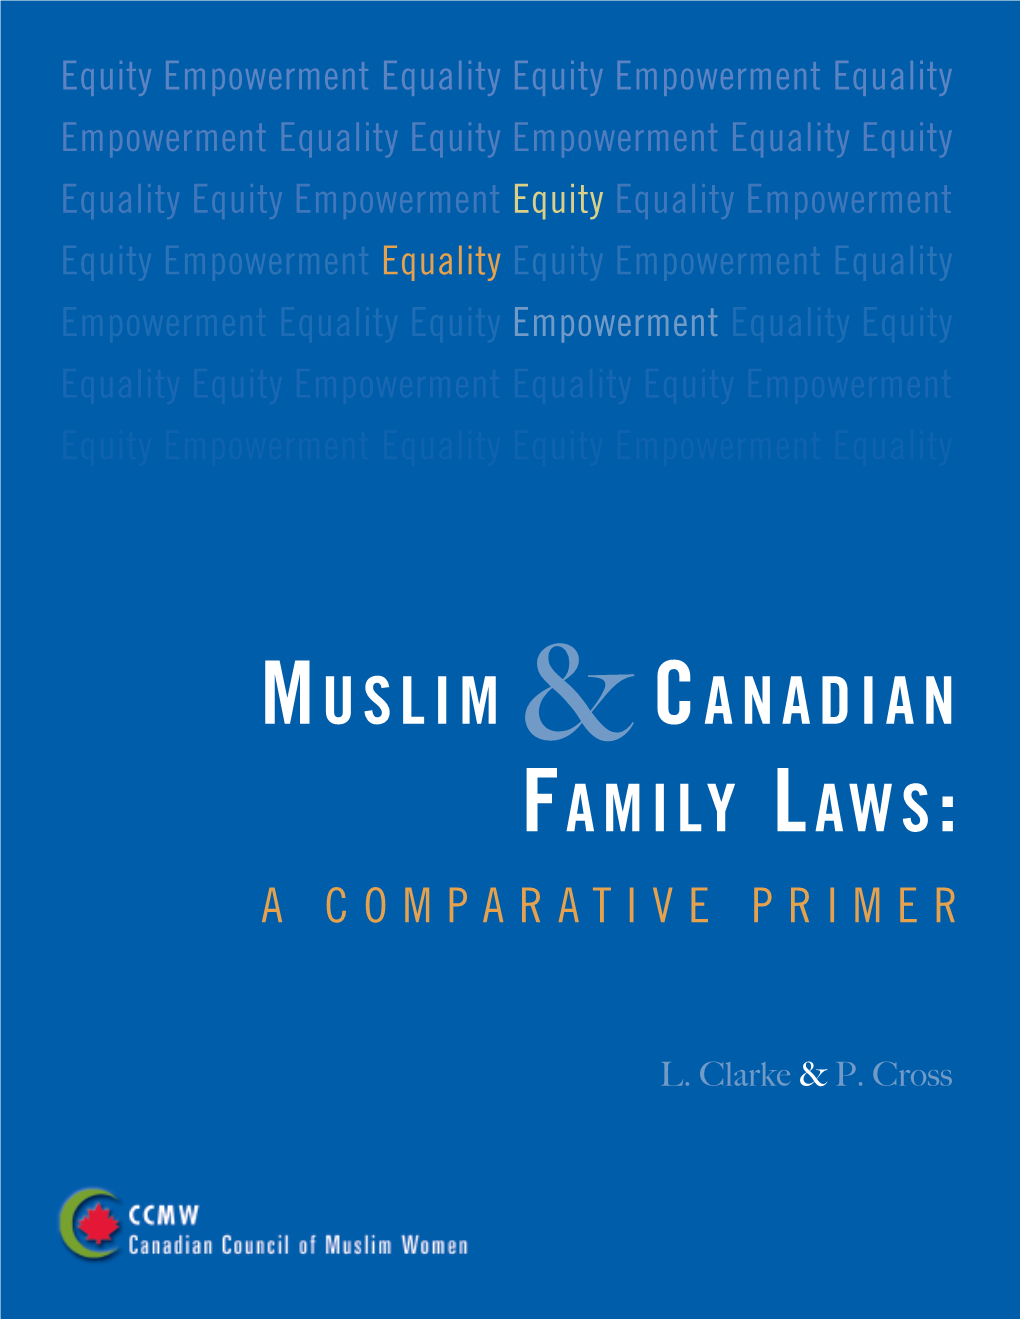 Muslim & Canadian Family Laws: a Comparative Primer